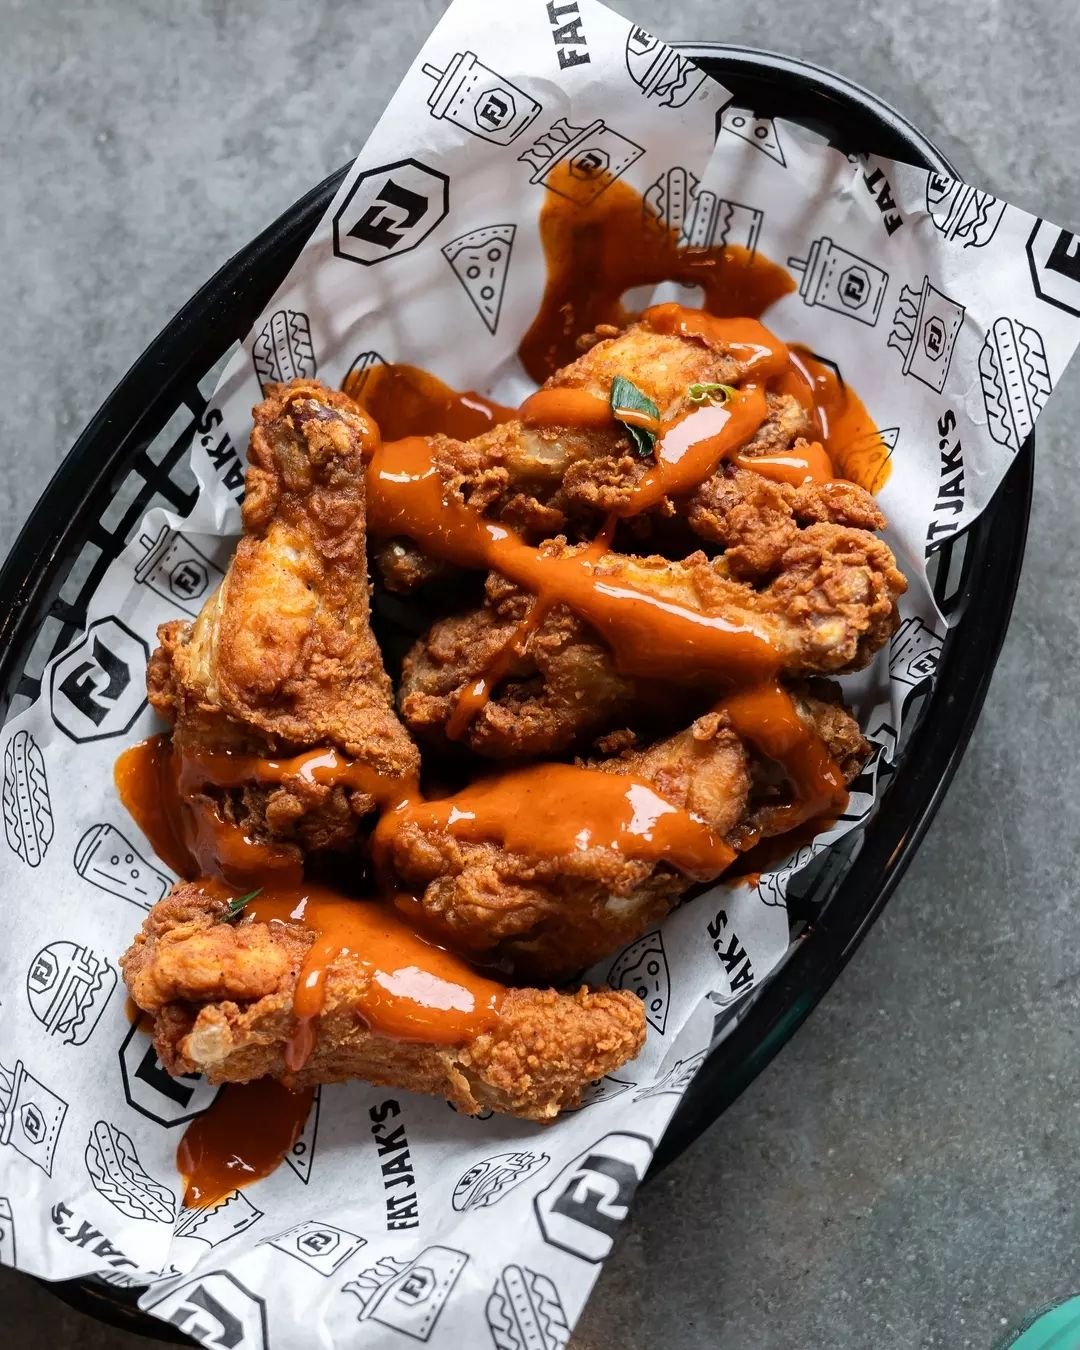 Spicy Wings to spice up your life!&nbsp;🌶️😜